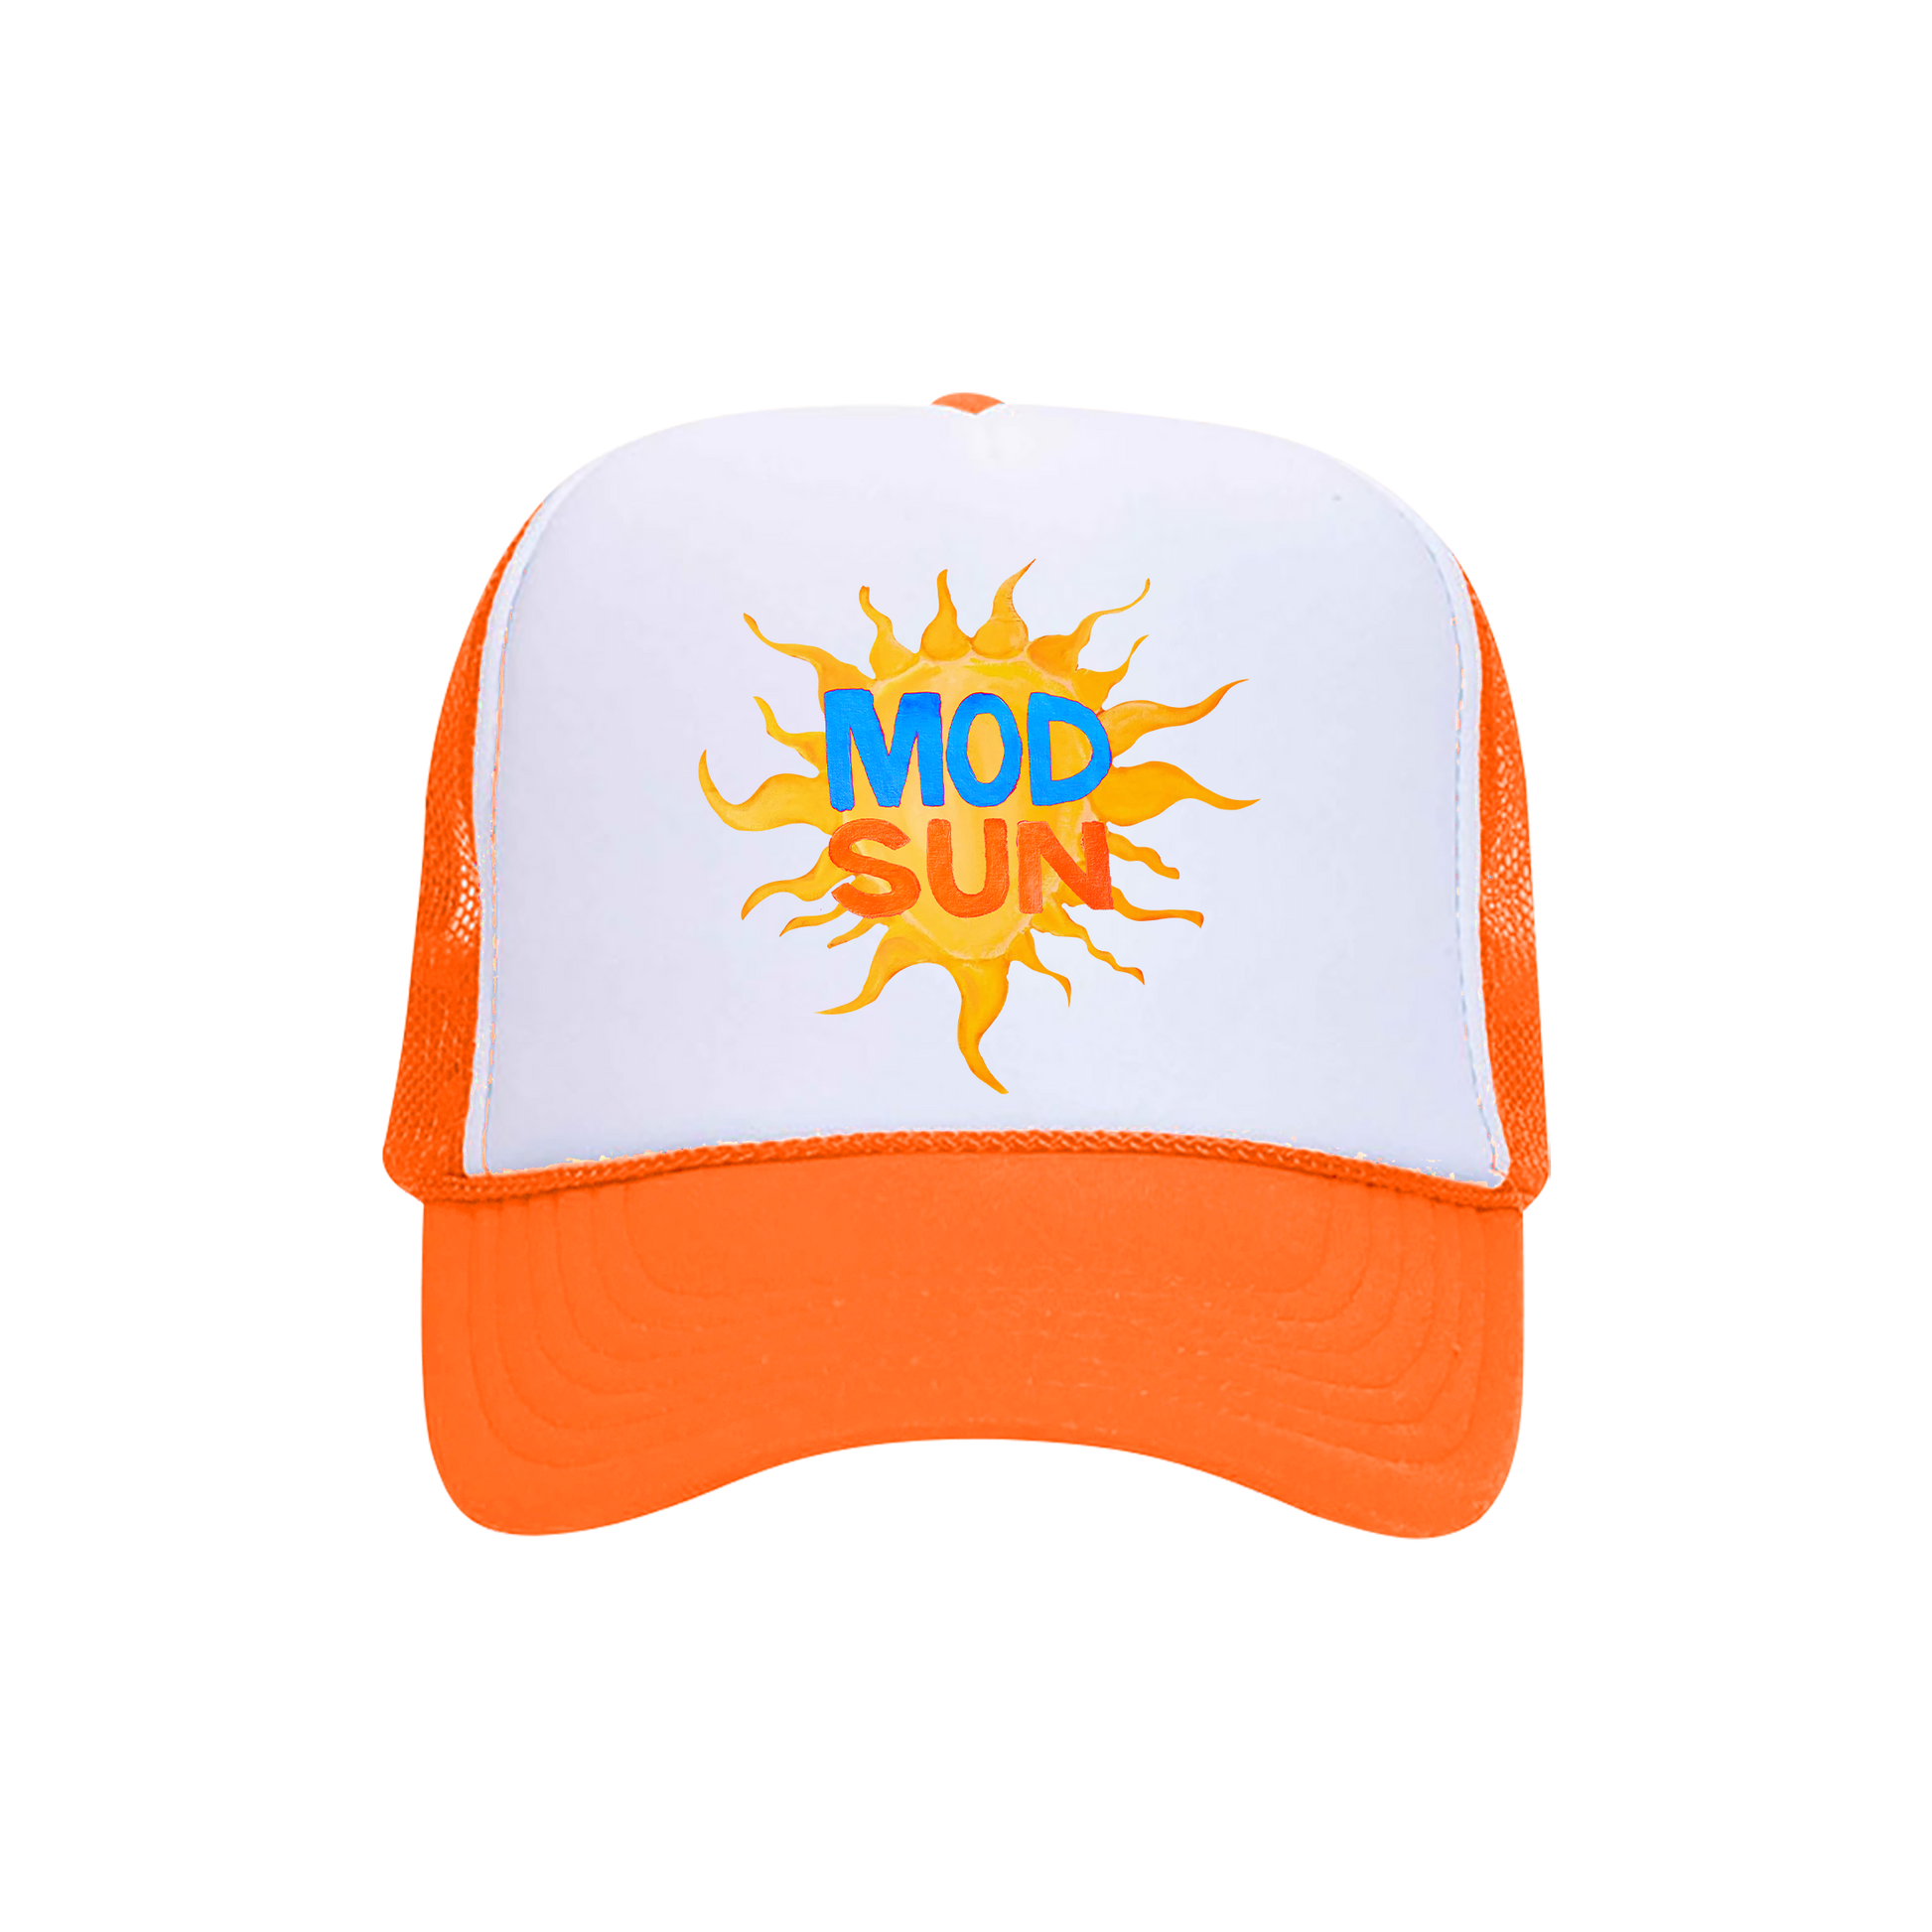 A classic white and orange trucker hat with Mod Sun logo on the front.